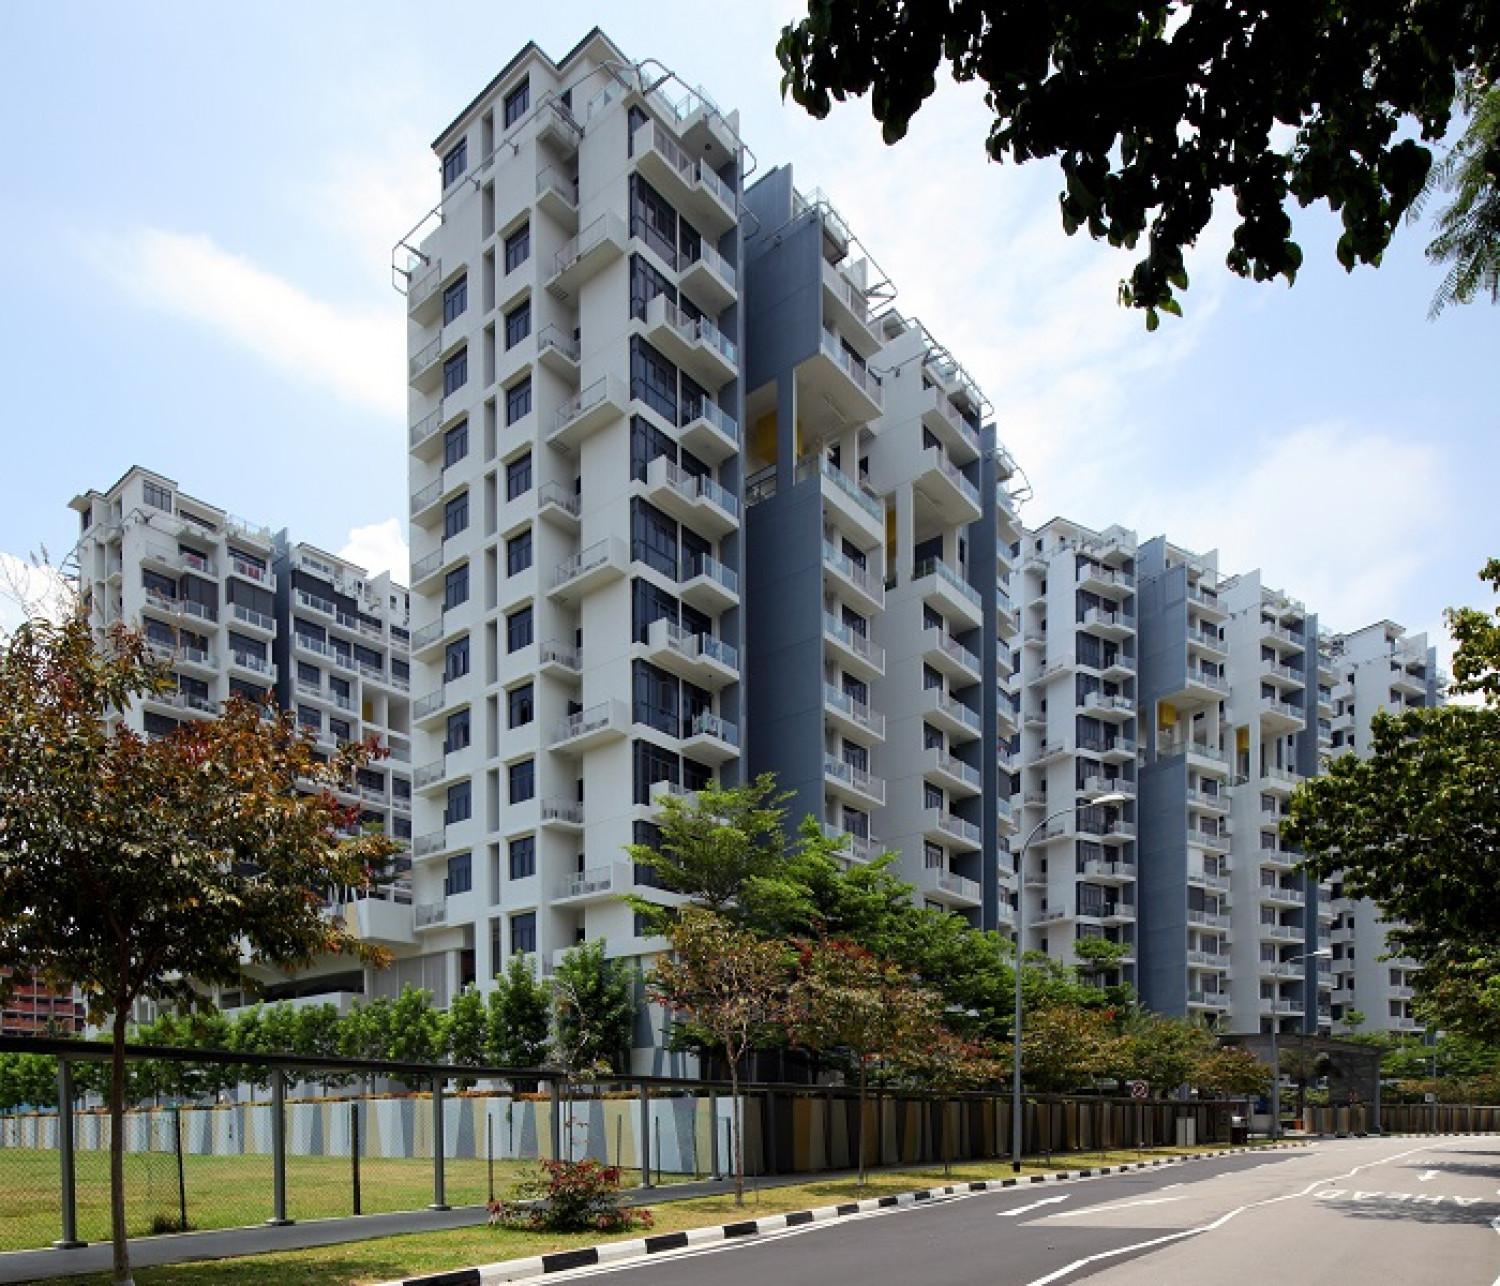 FoundOnEdgeProp: Condominiums with affordable asking rents - Property News